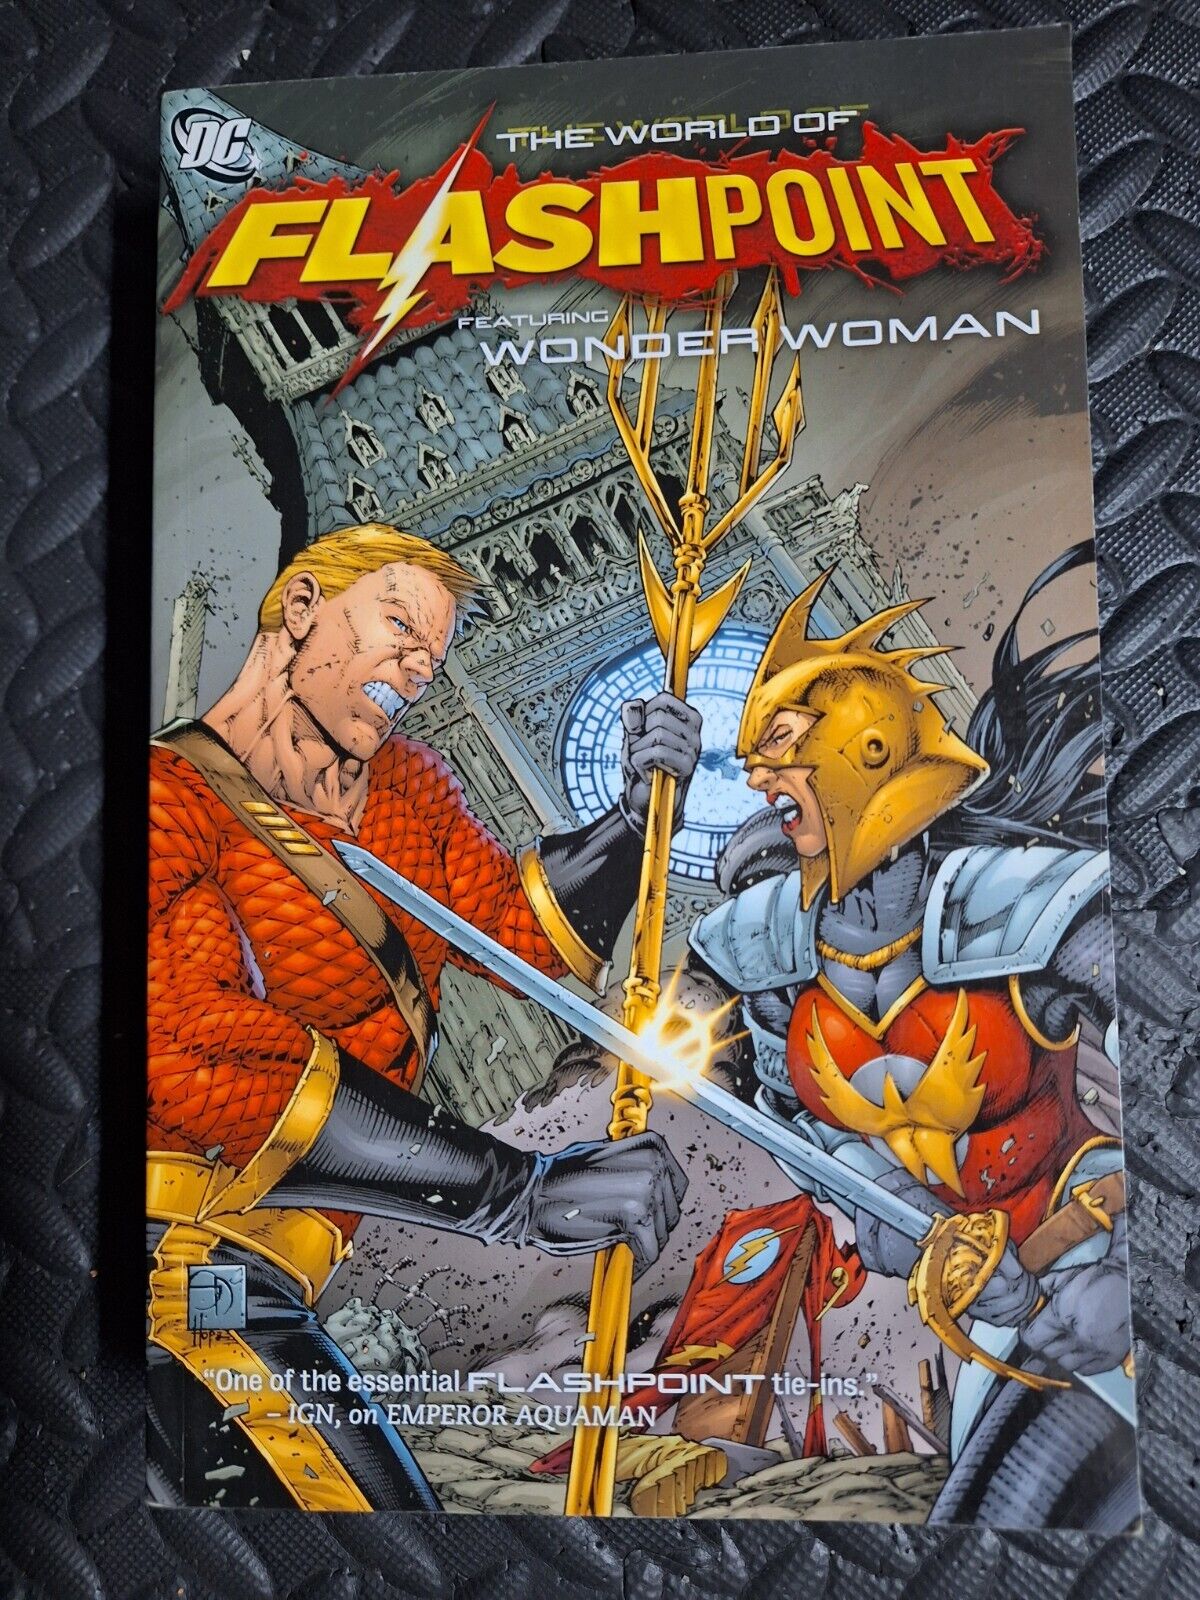 THE WORLD OF FLASHPOINT FEATURING WONDER WOMAN